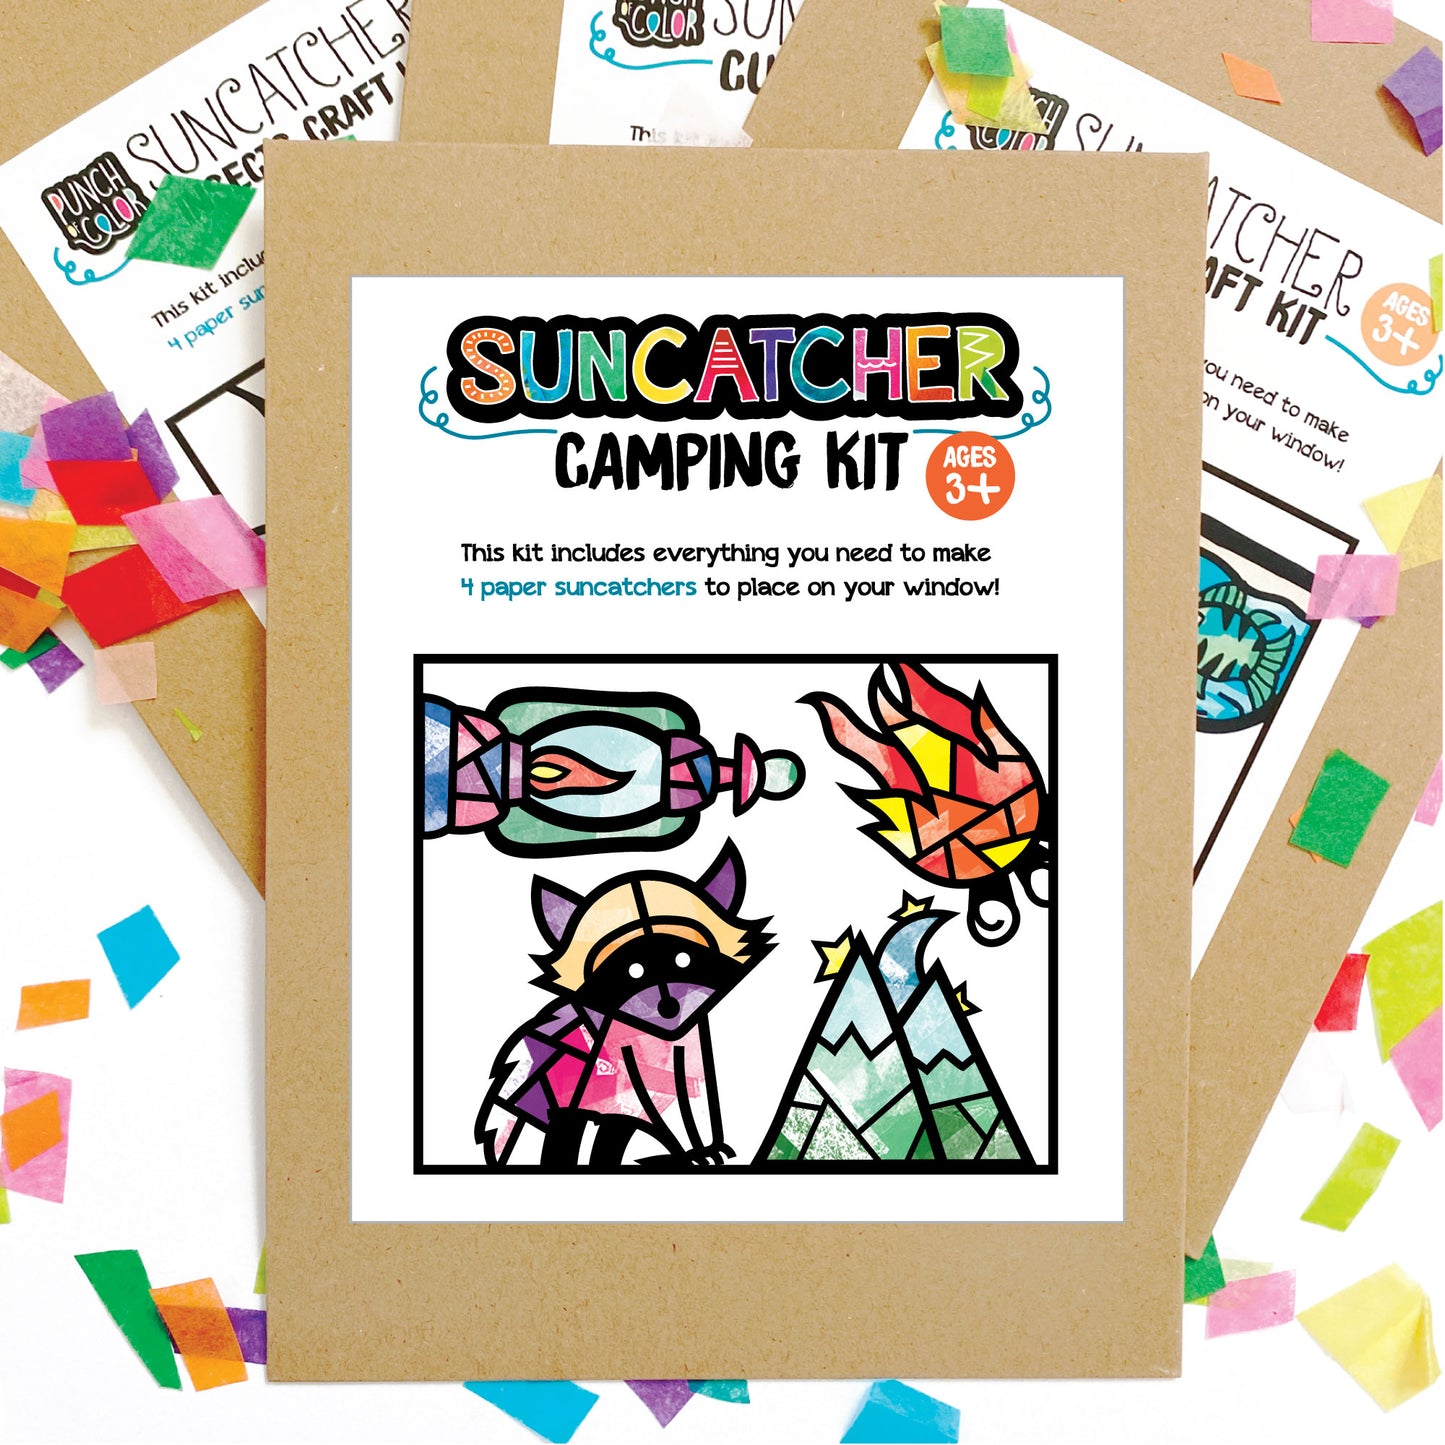 Camping themed suncatcher arts and crafts kit, a mess-free paper based activity for toddlers and kids.